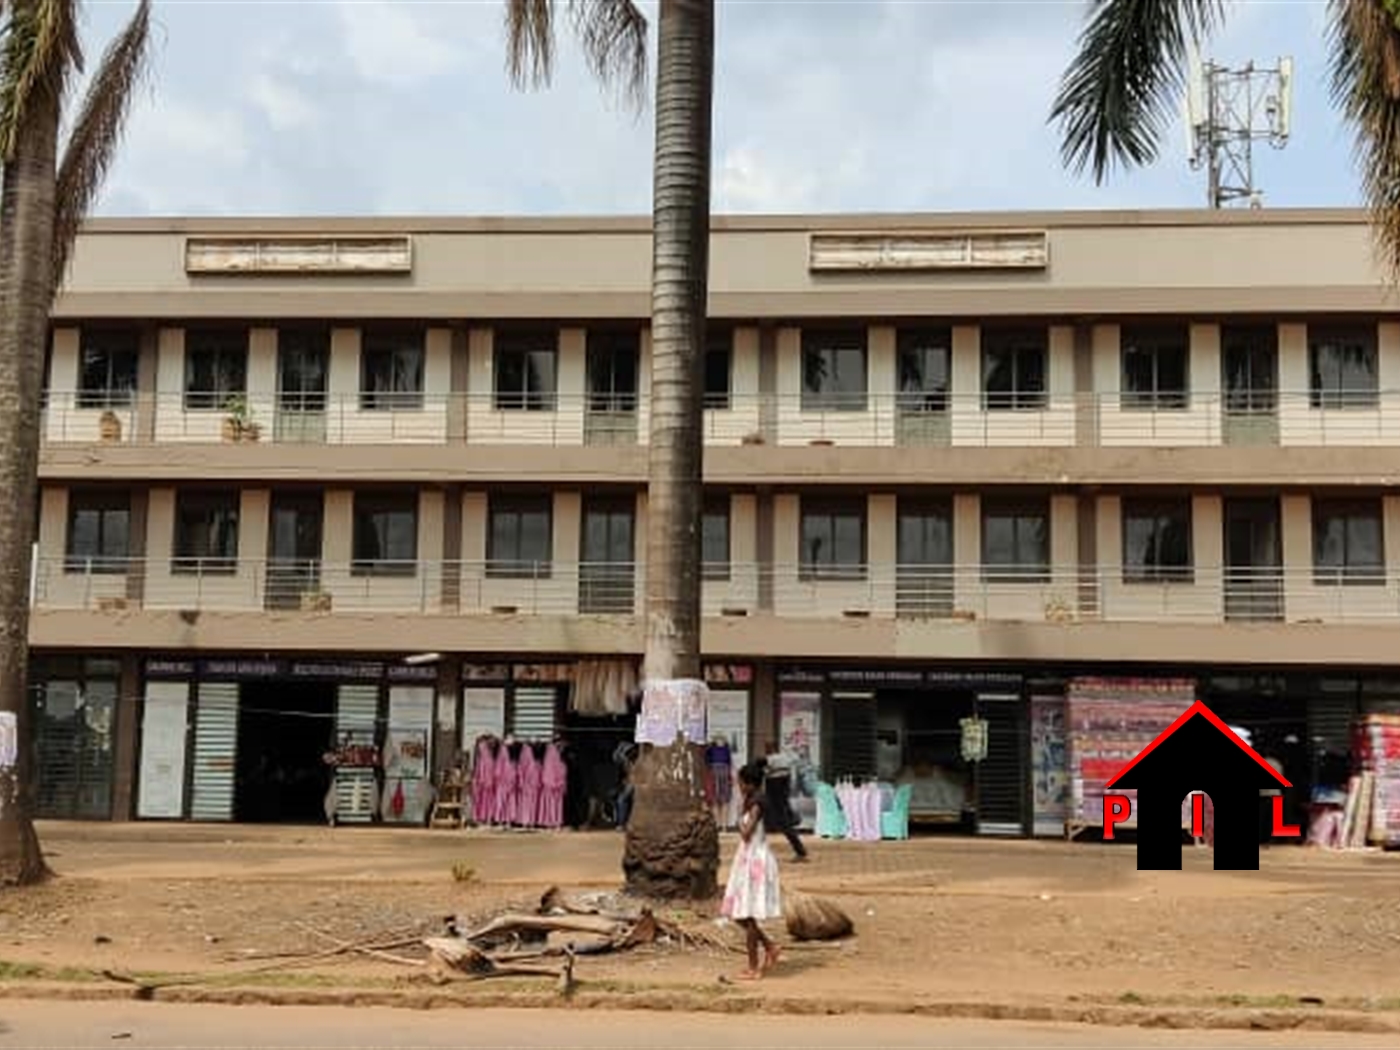 Commercial block for sale in Bufuumbo Mbaale